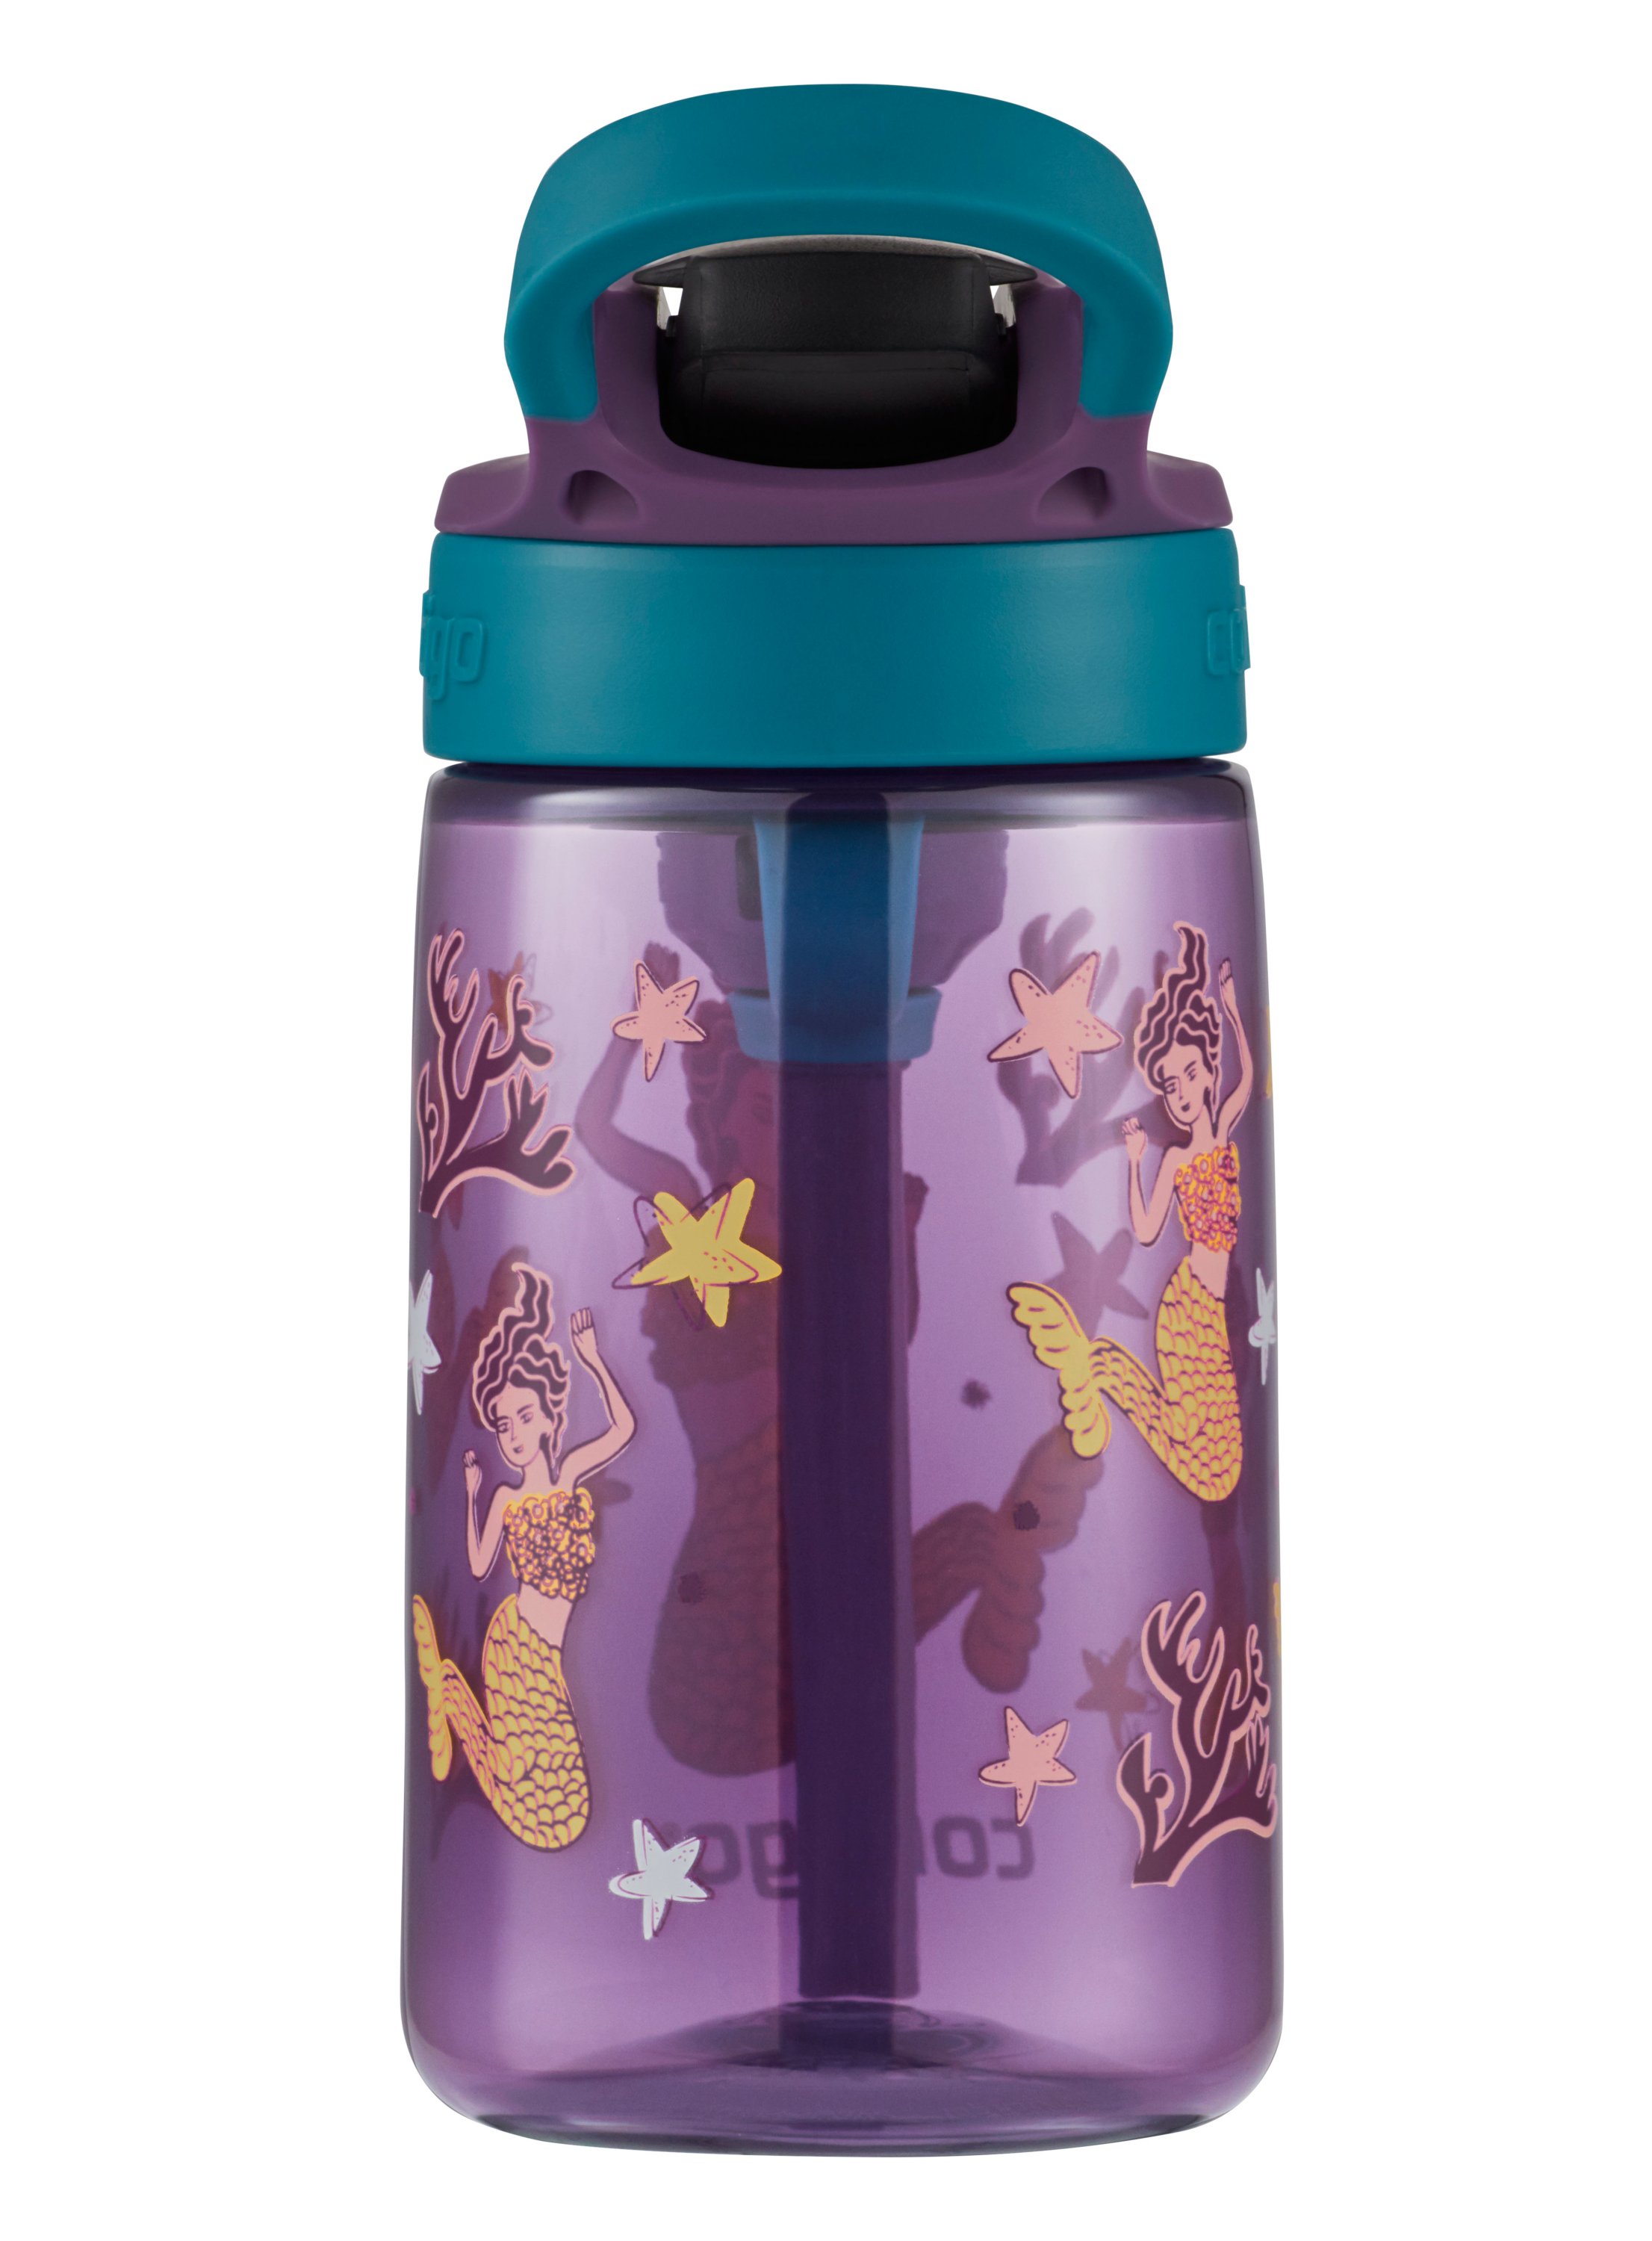 Arogan 14 oz Mermaid Stainless Steel Kids Water Bottle ，with Leak-Proof  Straw Lid for Toddlers, Boys and Girls, Pink 